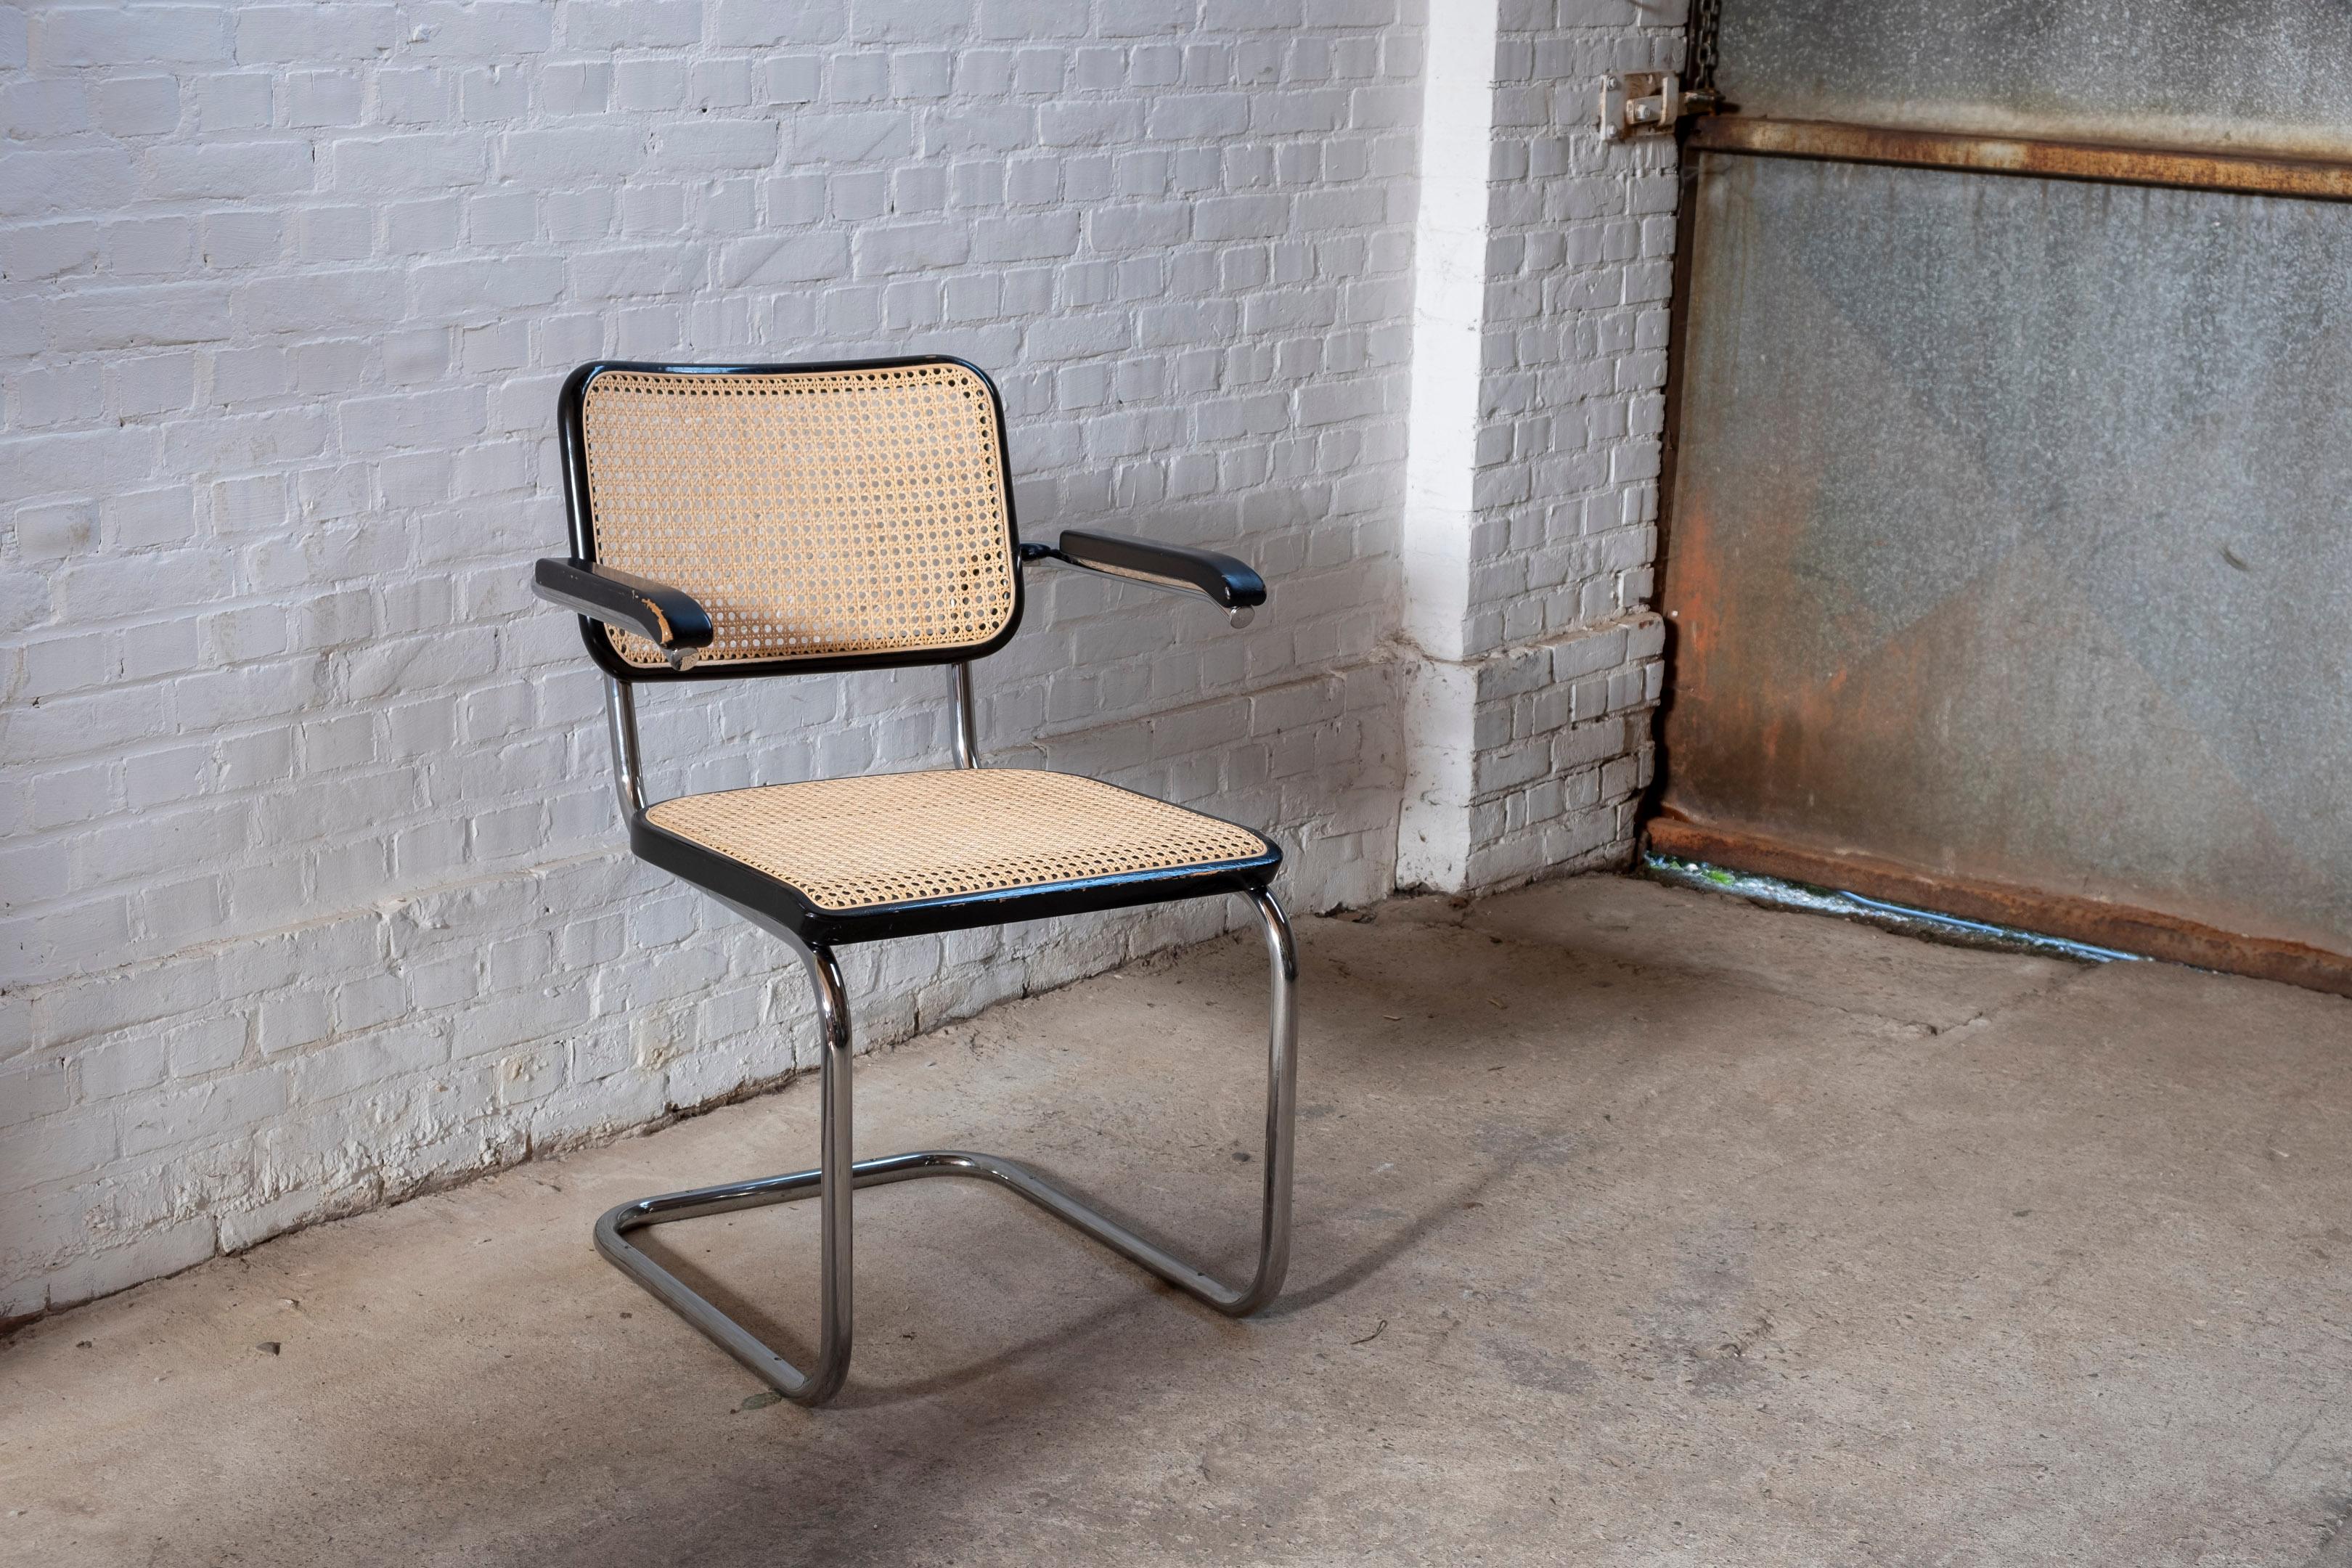 Iconic tubular steel chair model S 64, designed by Marcel Breuer for Thonet in 1928. The frame is made of chromed tubular steel. The seat and backrest are covered with the 